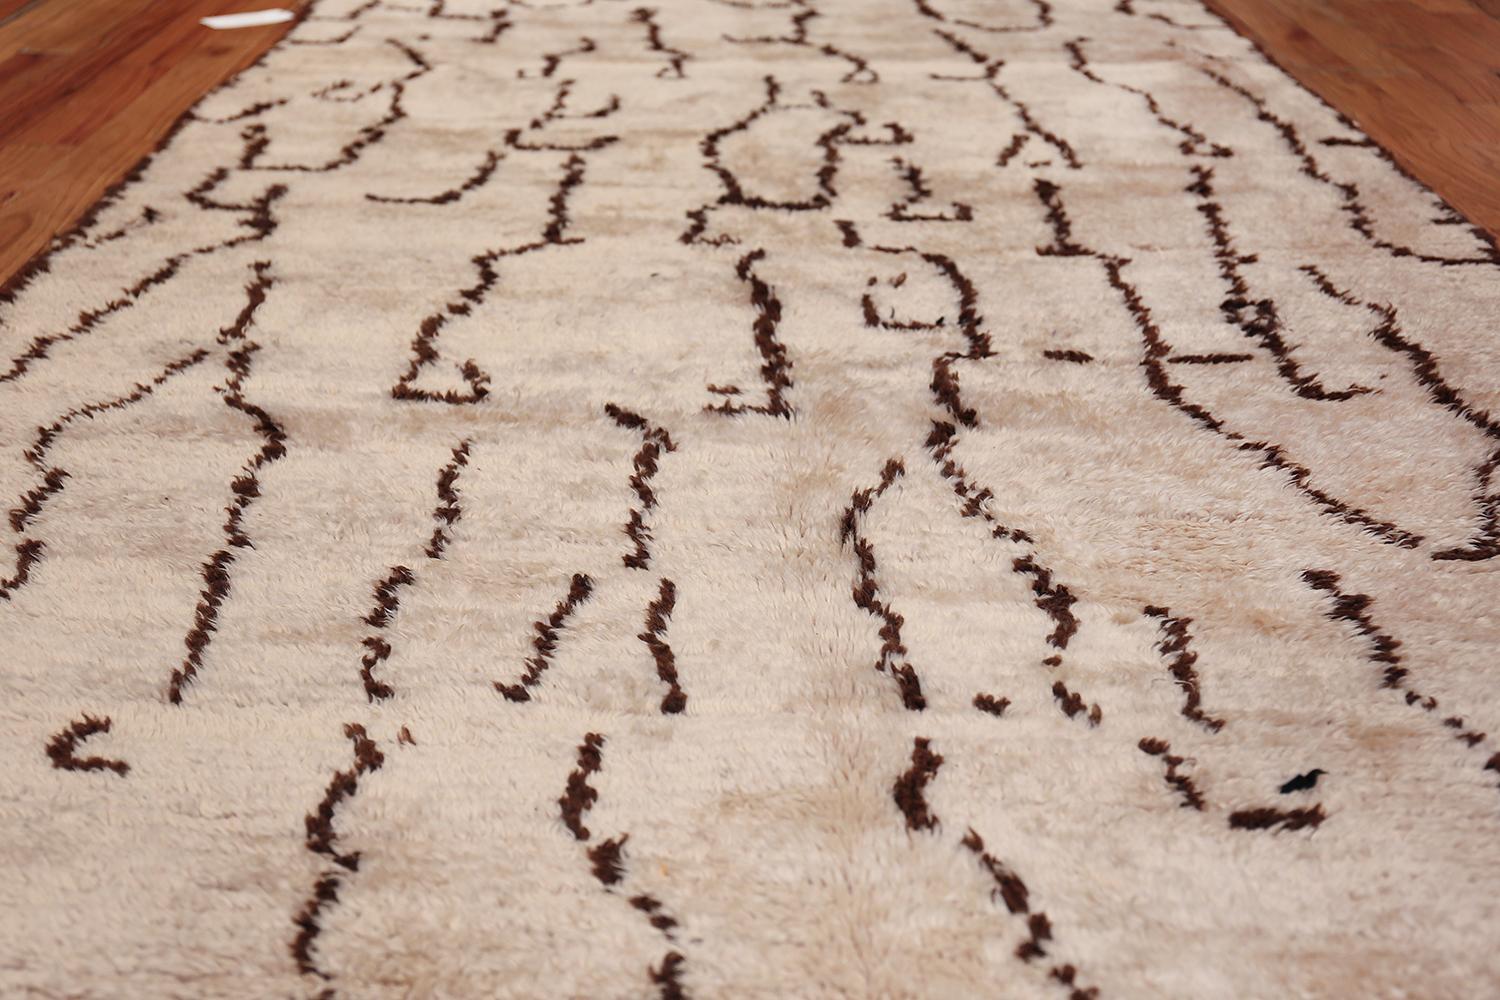 Hand-Knotted Brown and Cream Vintage Shag Moroccan Beni Ourain Rug. Size: 5 ft x 10 ft 9 in